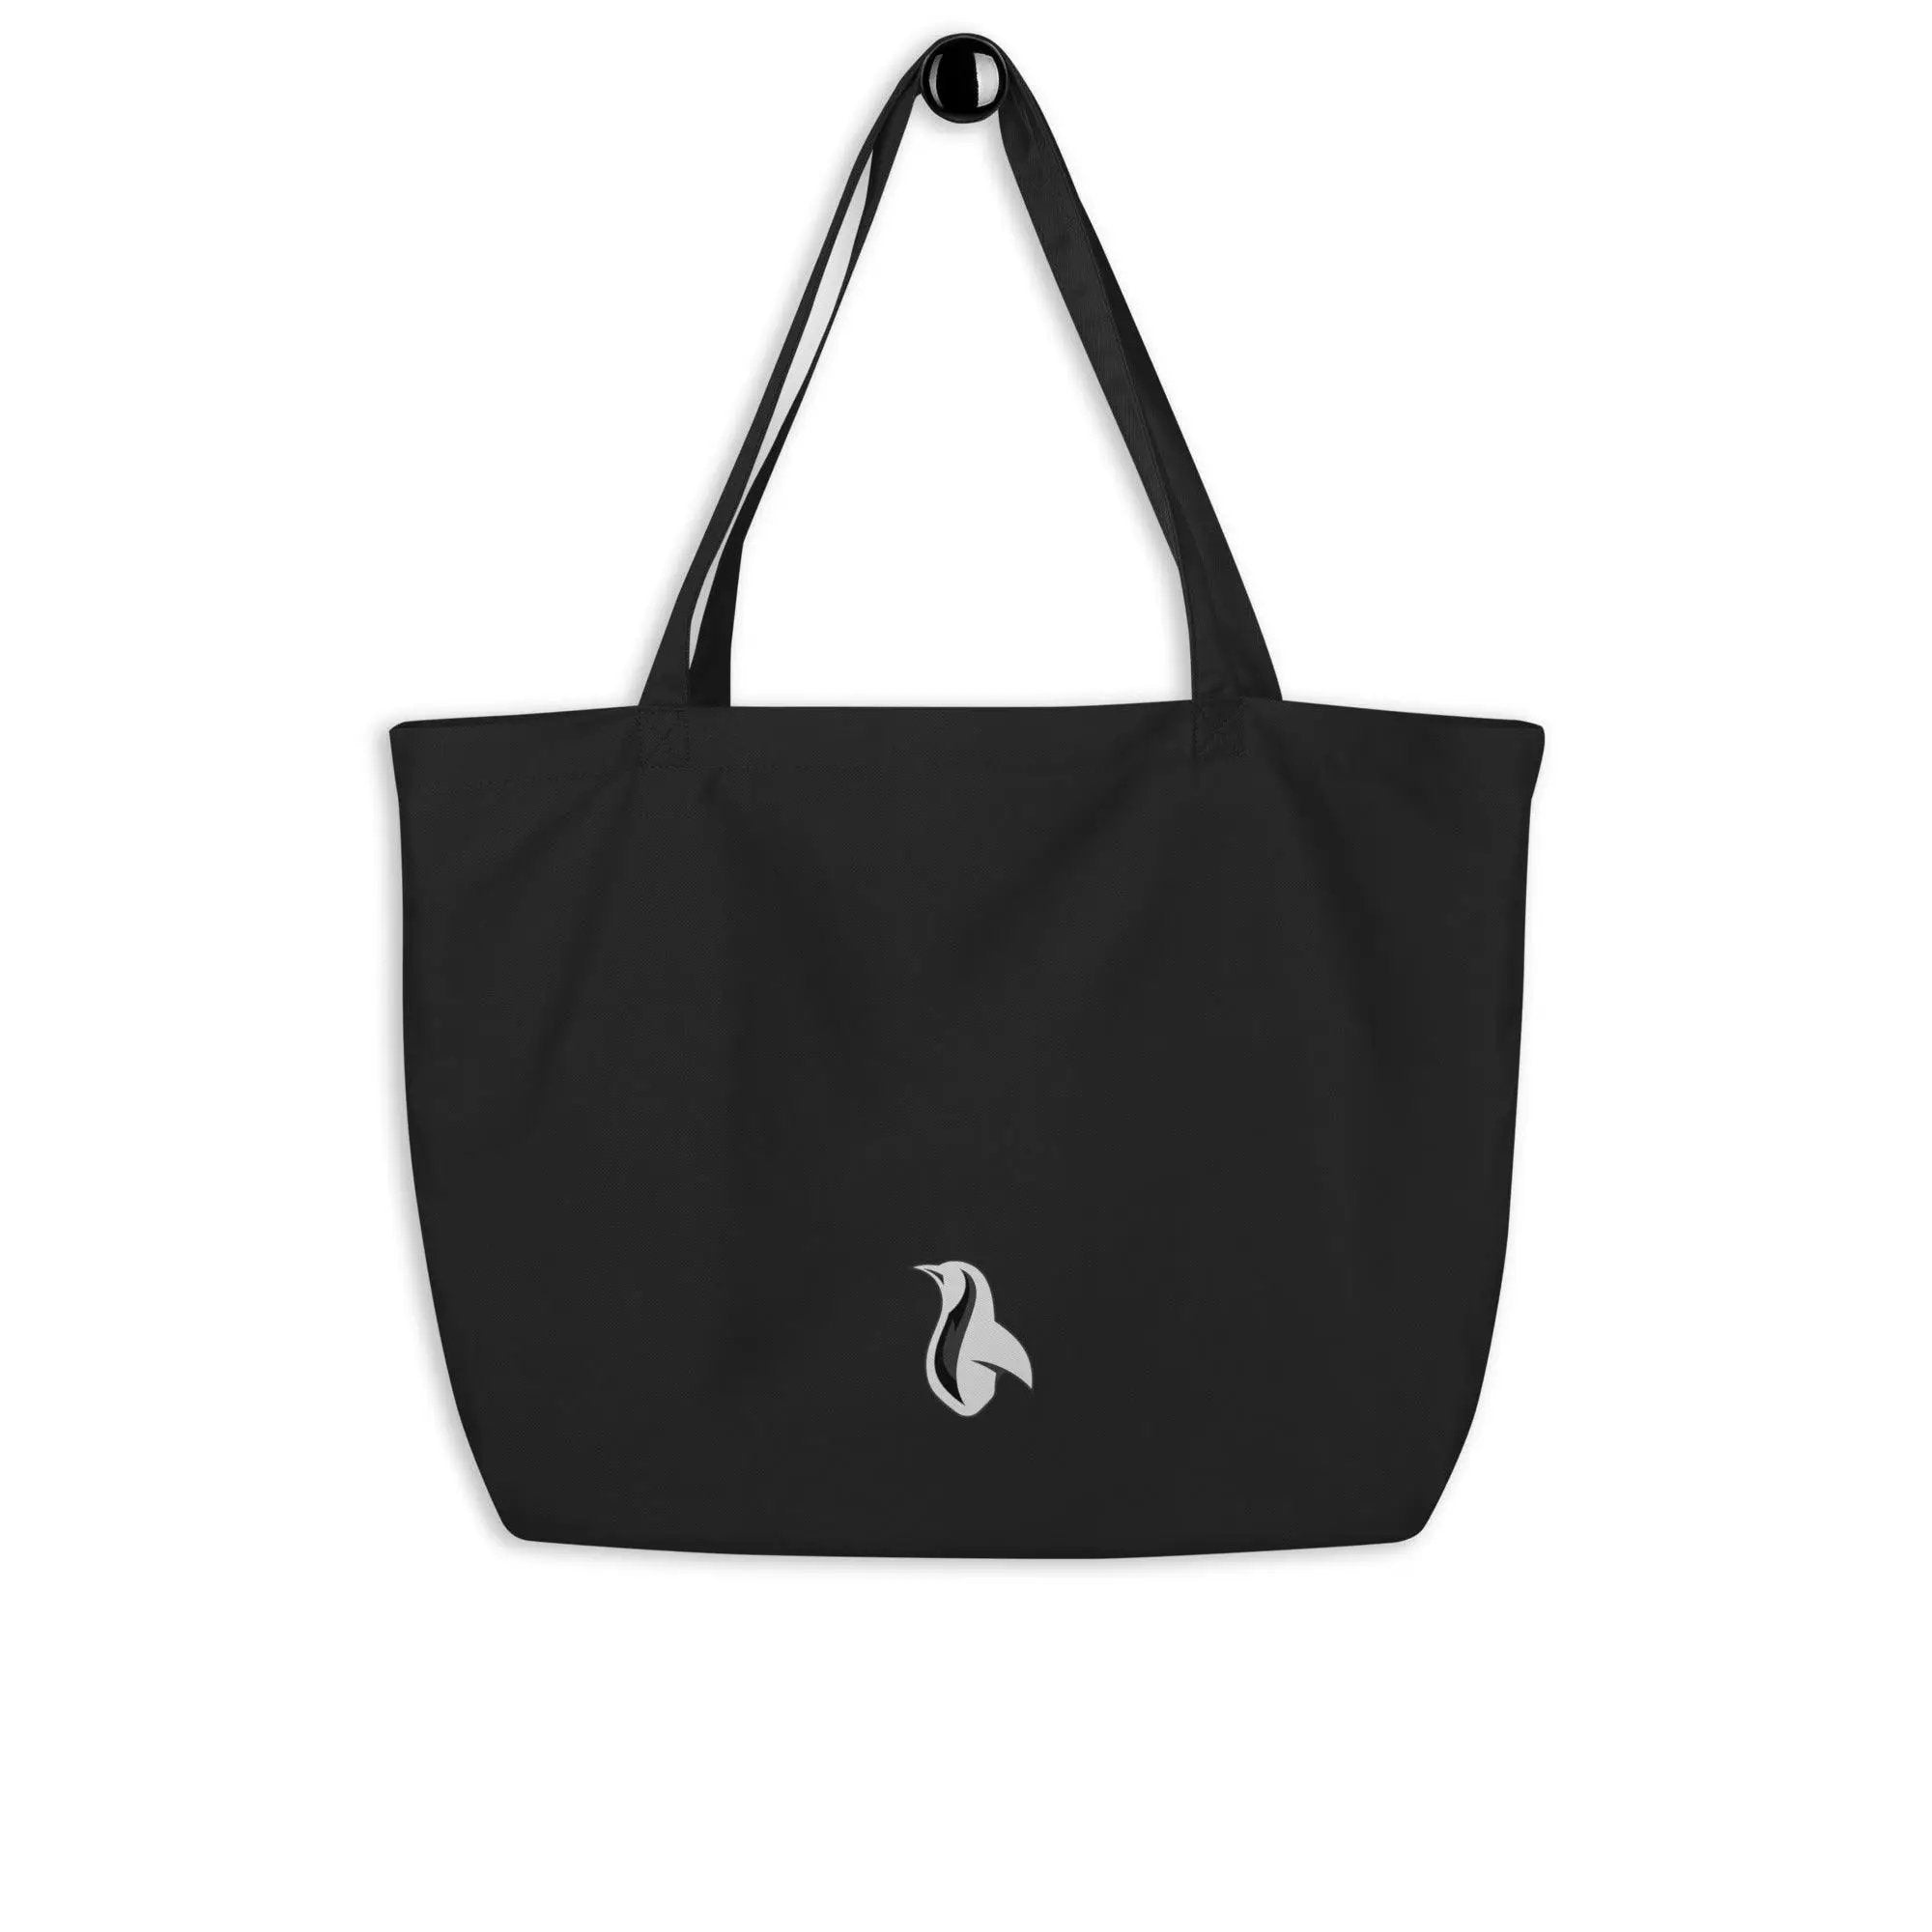 Fight For Freedom Large organic tote bag